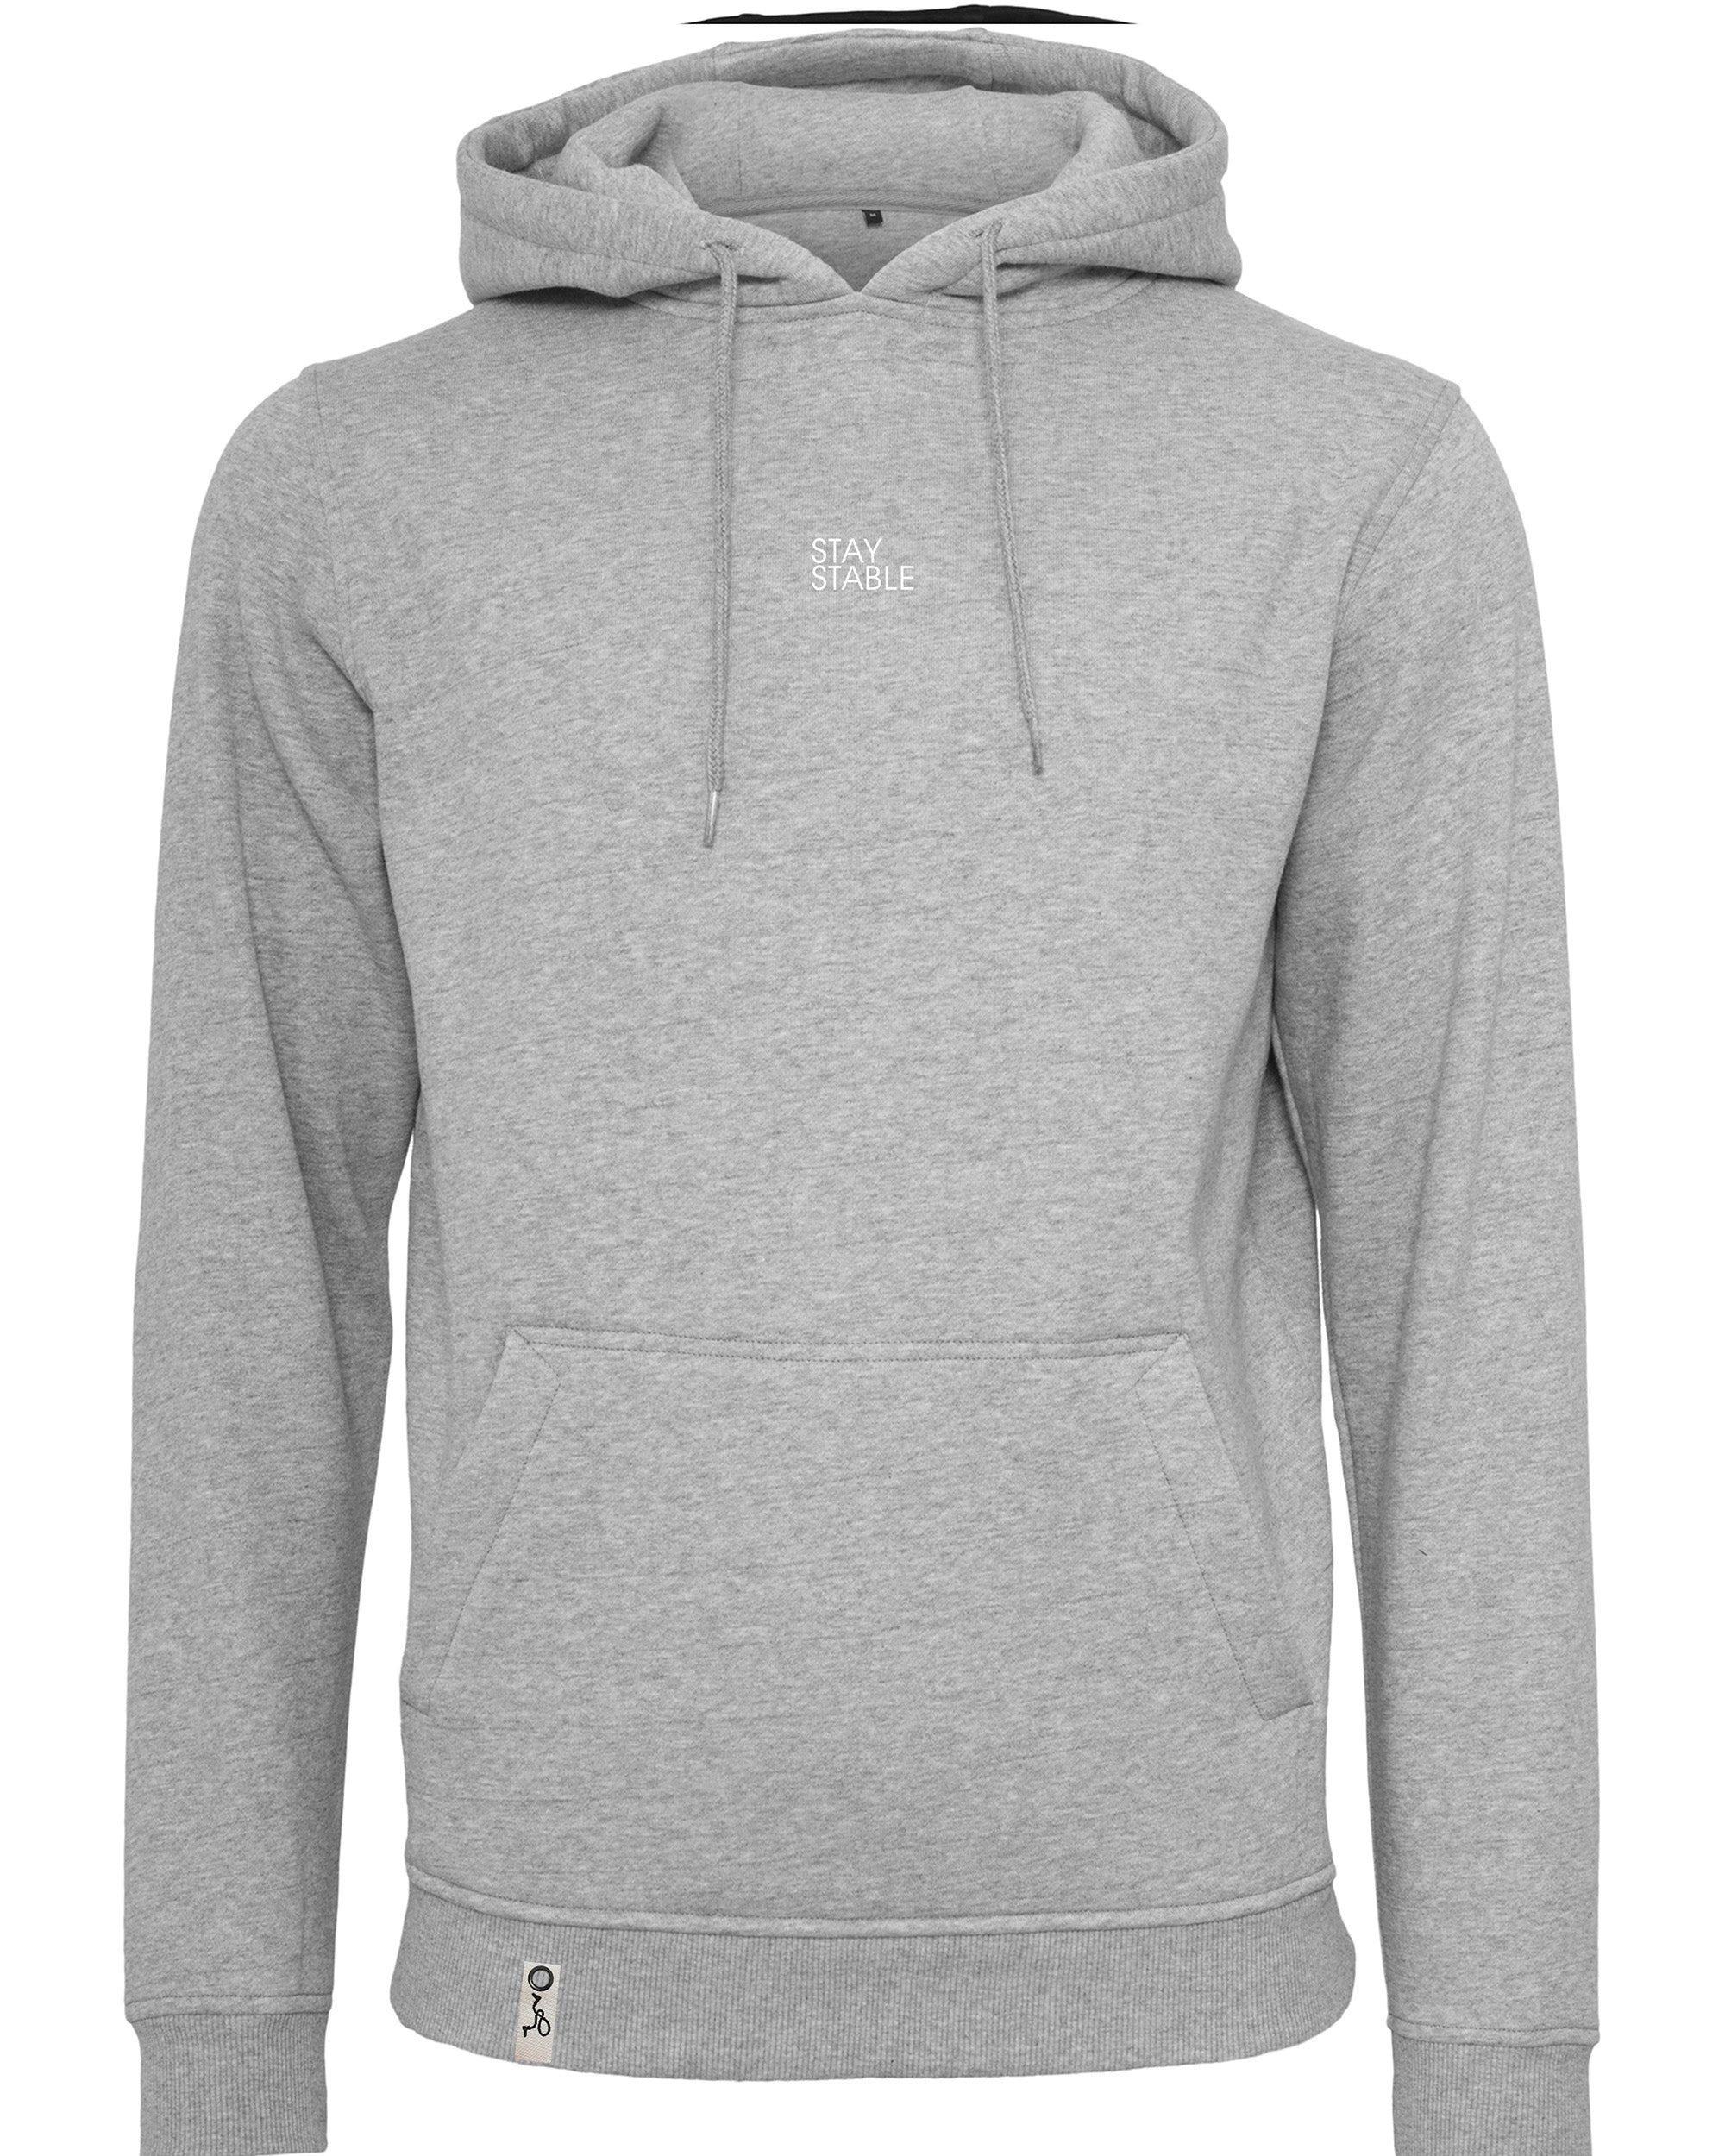 Unisex Heavy Hoody - Stay Stable